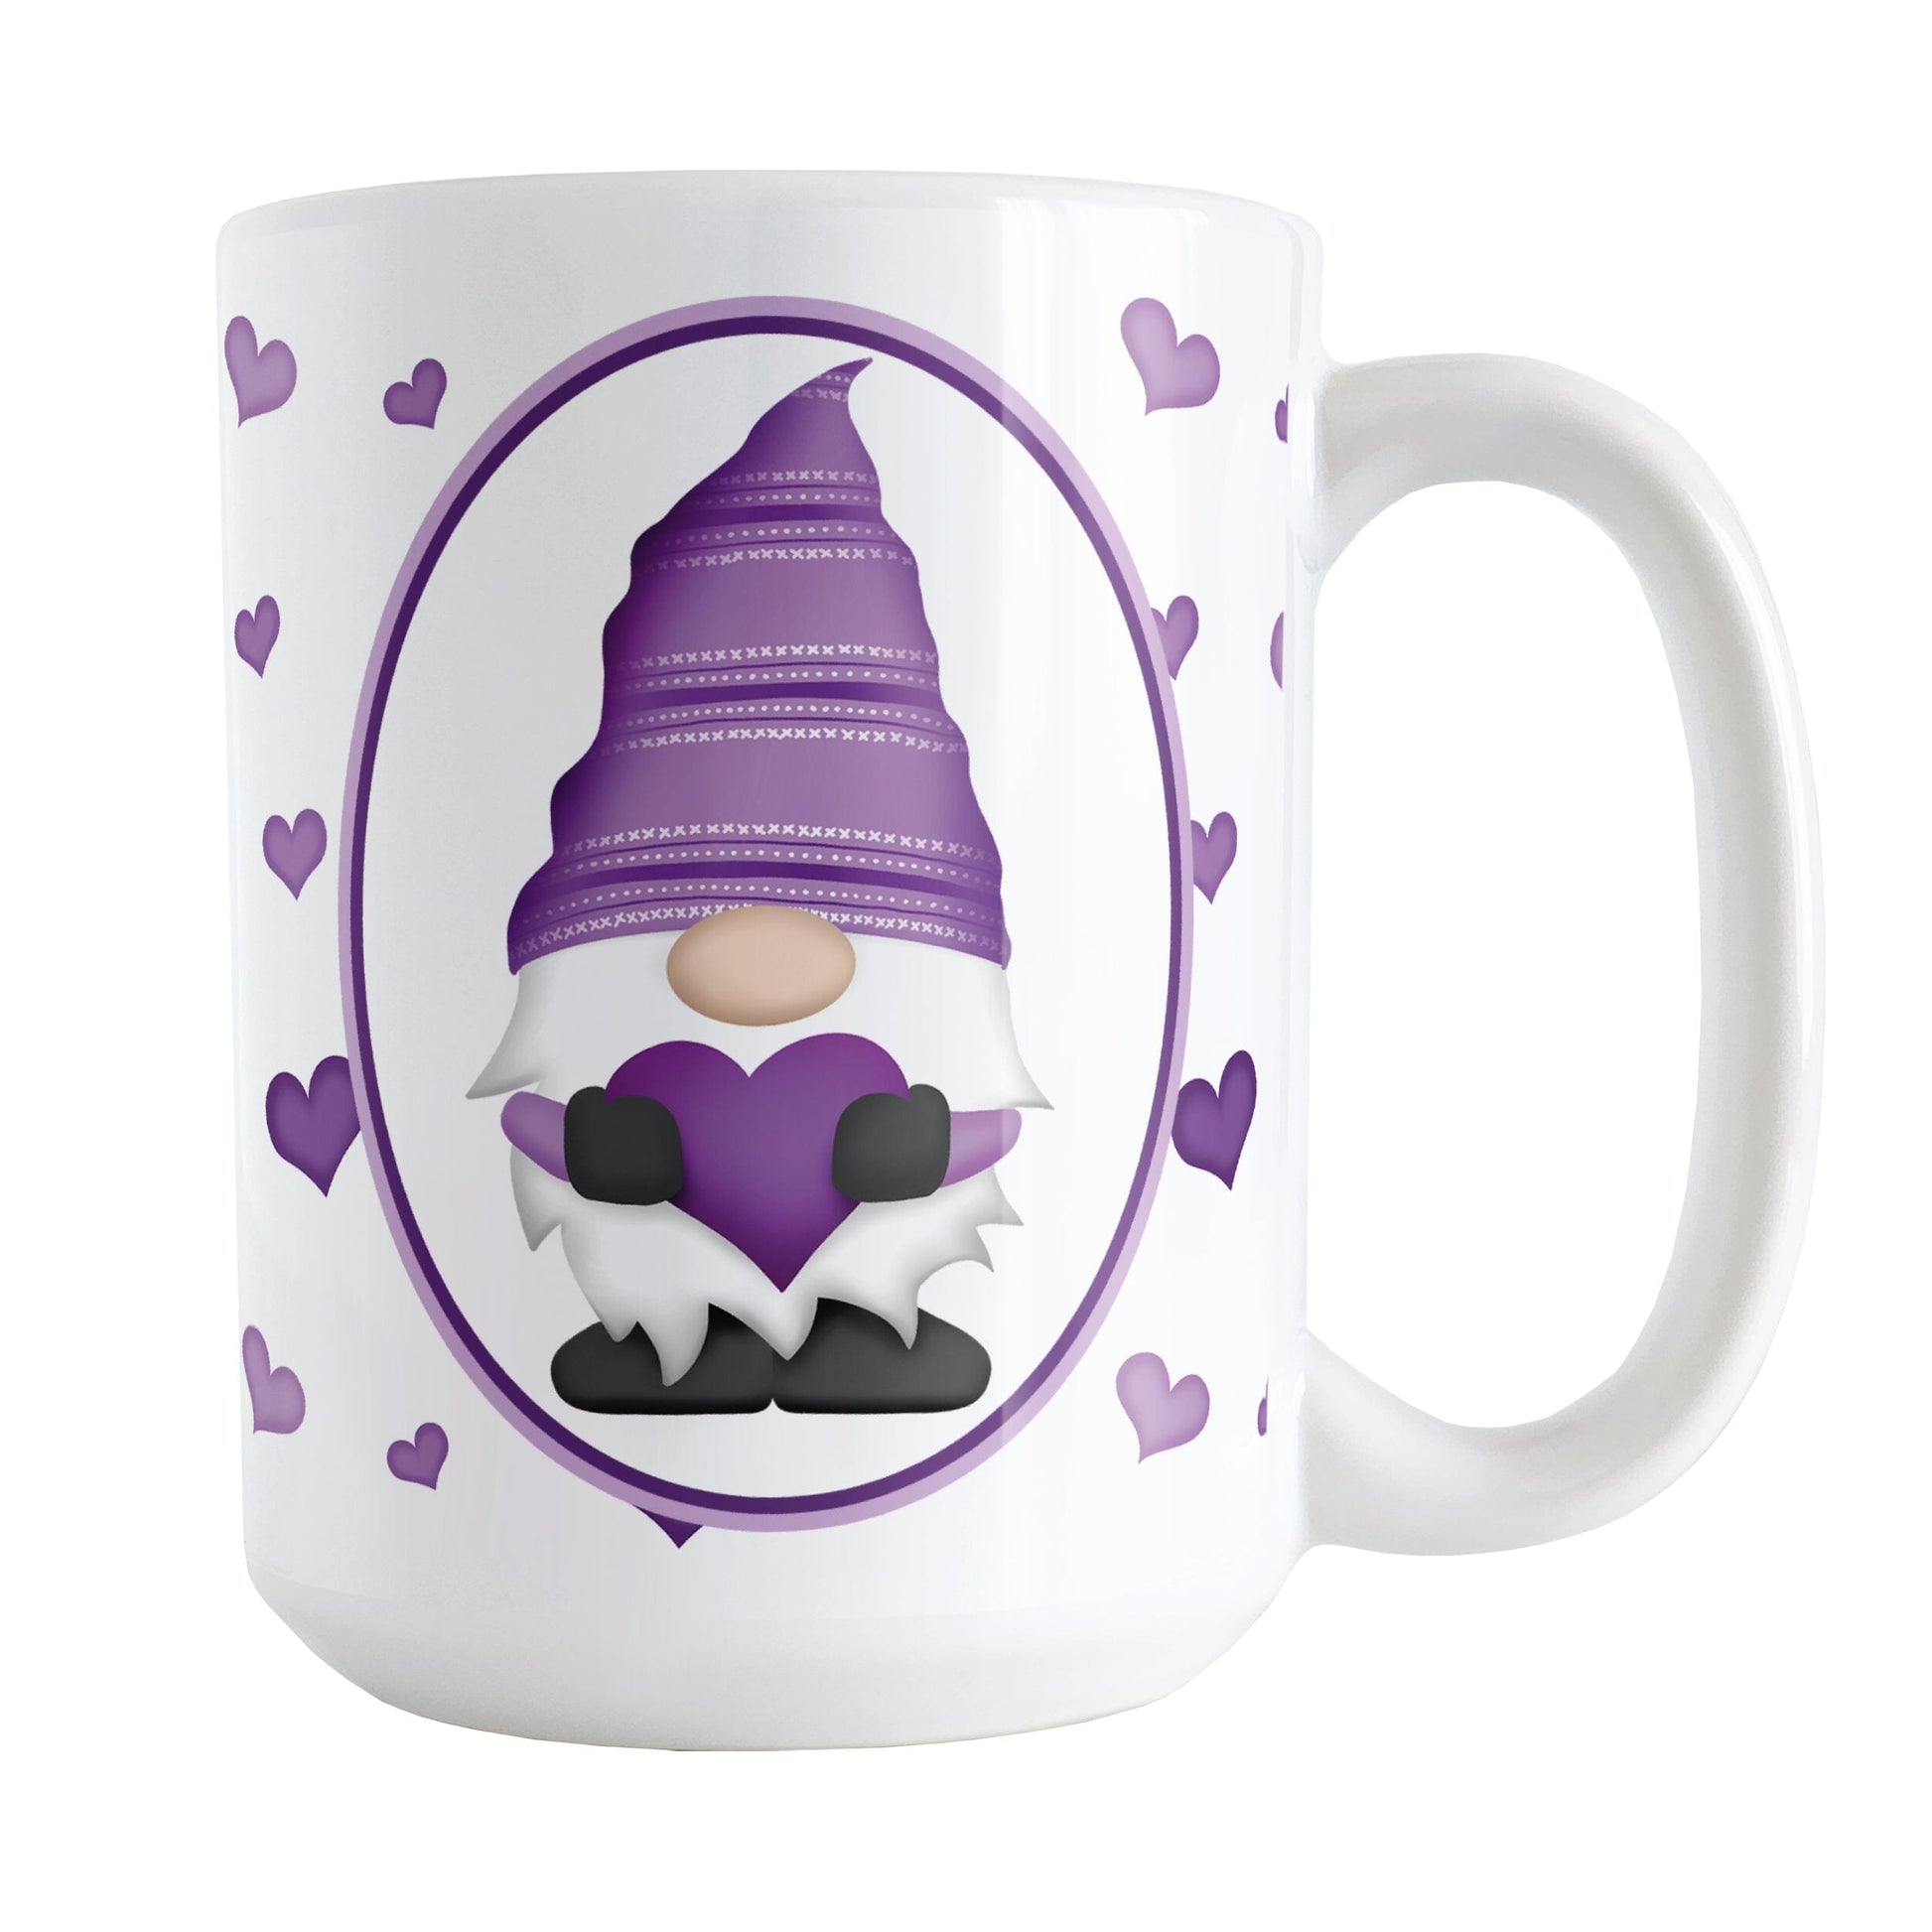 Purple Gnome Dainty Hearts Mug (15oz) at Amy's Coffee Mugs. A ceramic coffee mug designed with an adorable purple gnome in a white oval on both sides of the mug over a pattern of cute dainty hearts in different shades of purple that wrap around the mug to the handle.